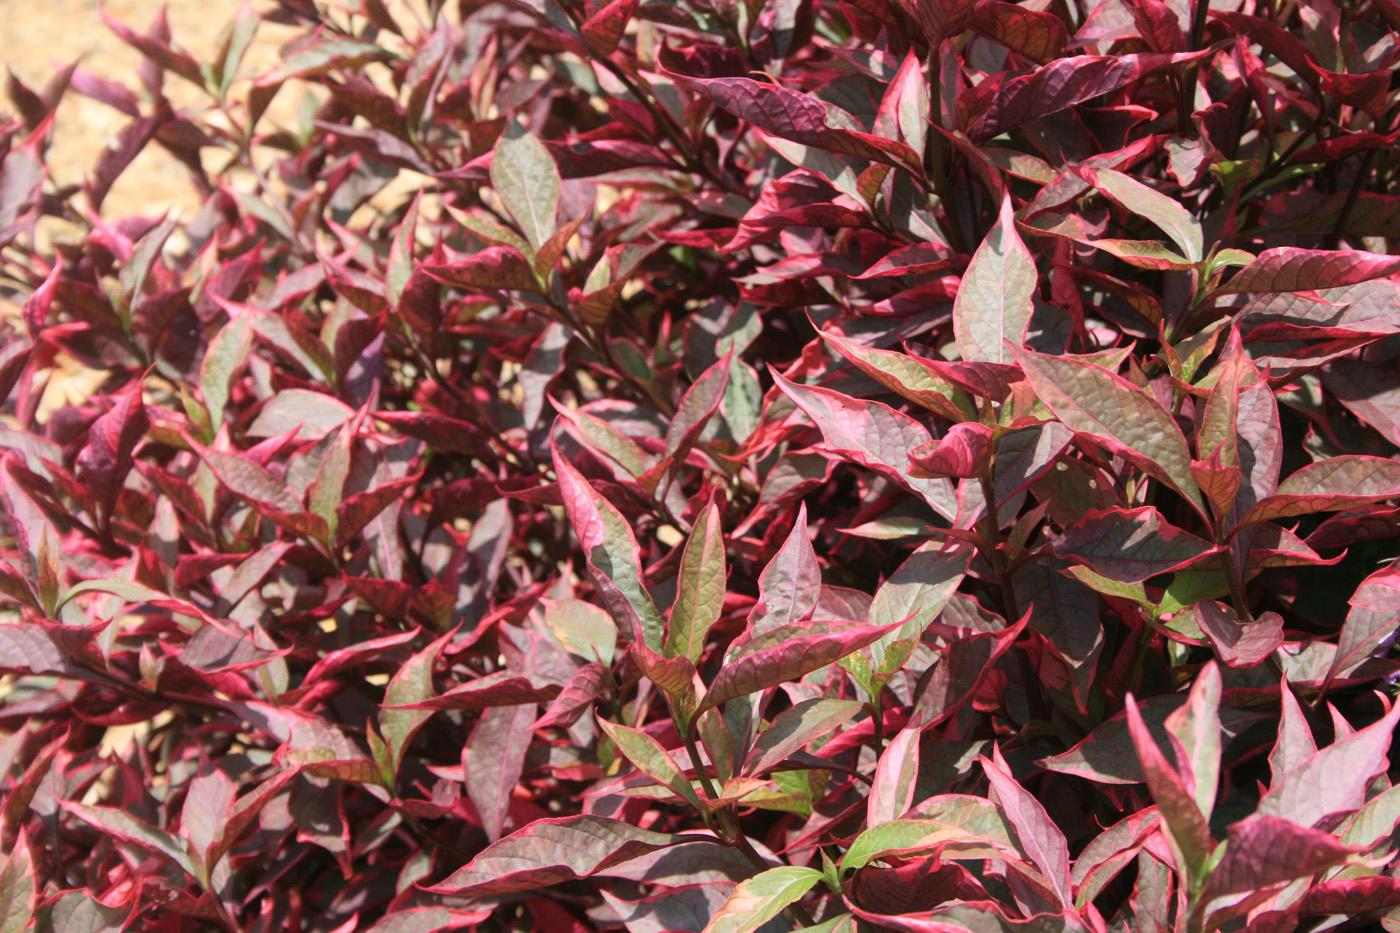 Brazilian Red Hot is a Joseph's Coat with wavy leaves that are variegated with purplish centers and fluorescent fuchsia margins. (Photo by Gary Bachman)